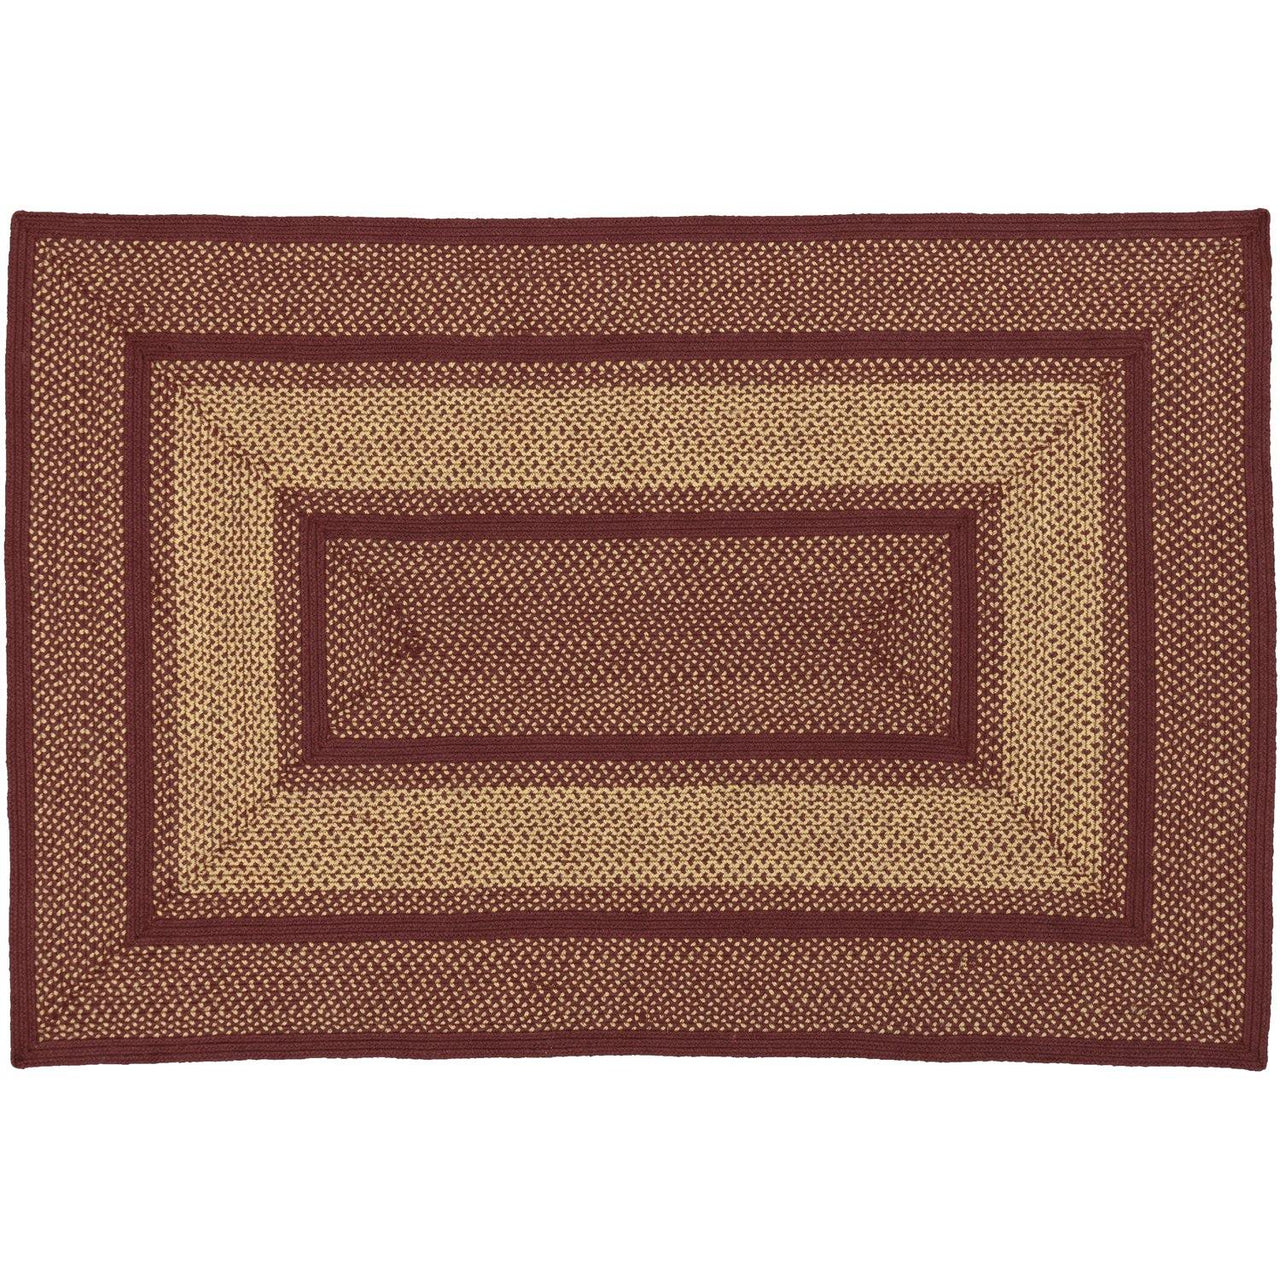 Burgundy Red Primitive Jute Braided Rug Rect 4x'6' with Rug Pad VHC Brands - The Fox Decor